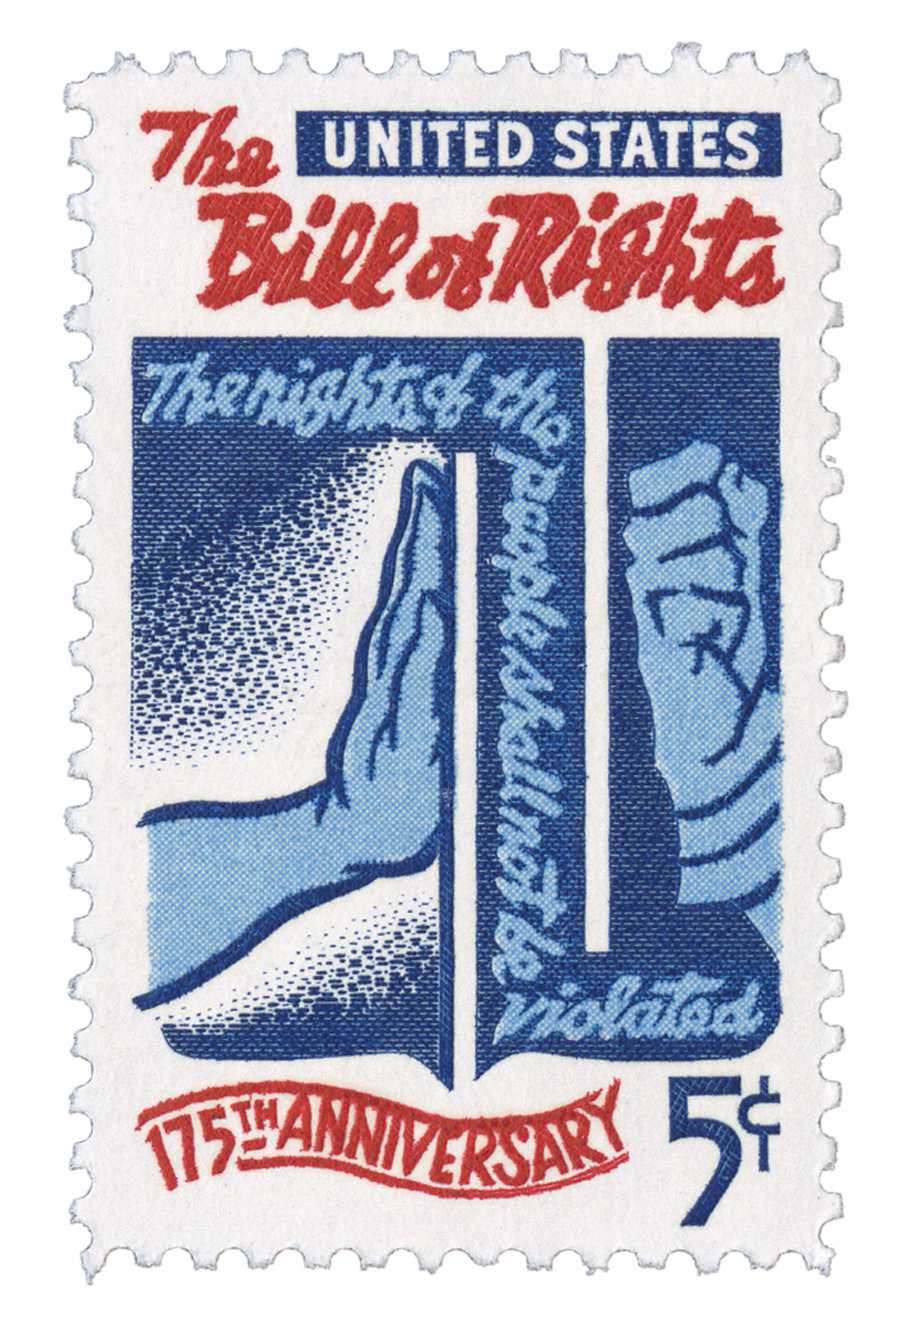 1966 5¢ Bill of Rights stamp